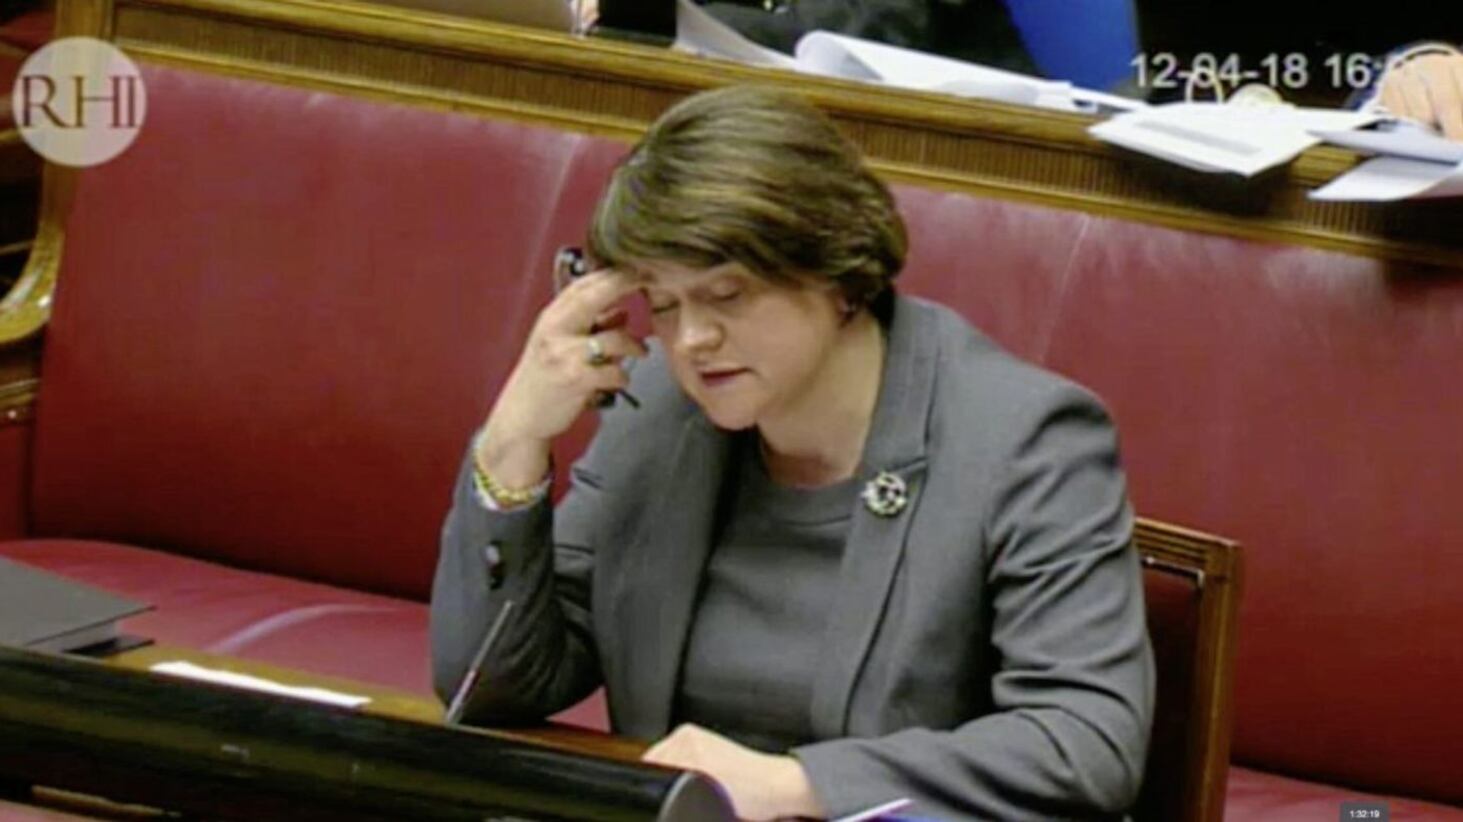 DUP leader Arlene Foster begins giving evidence to the RHI Enquiry at Stormont today. 